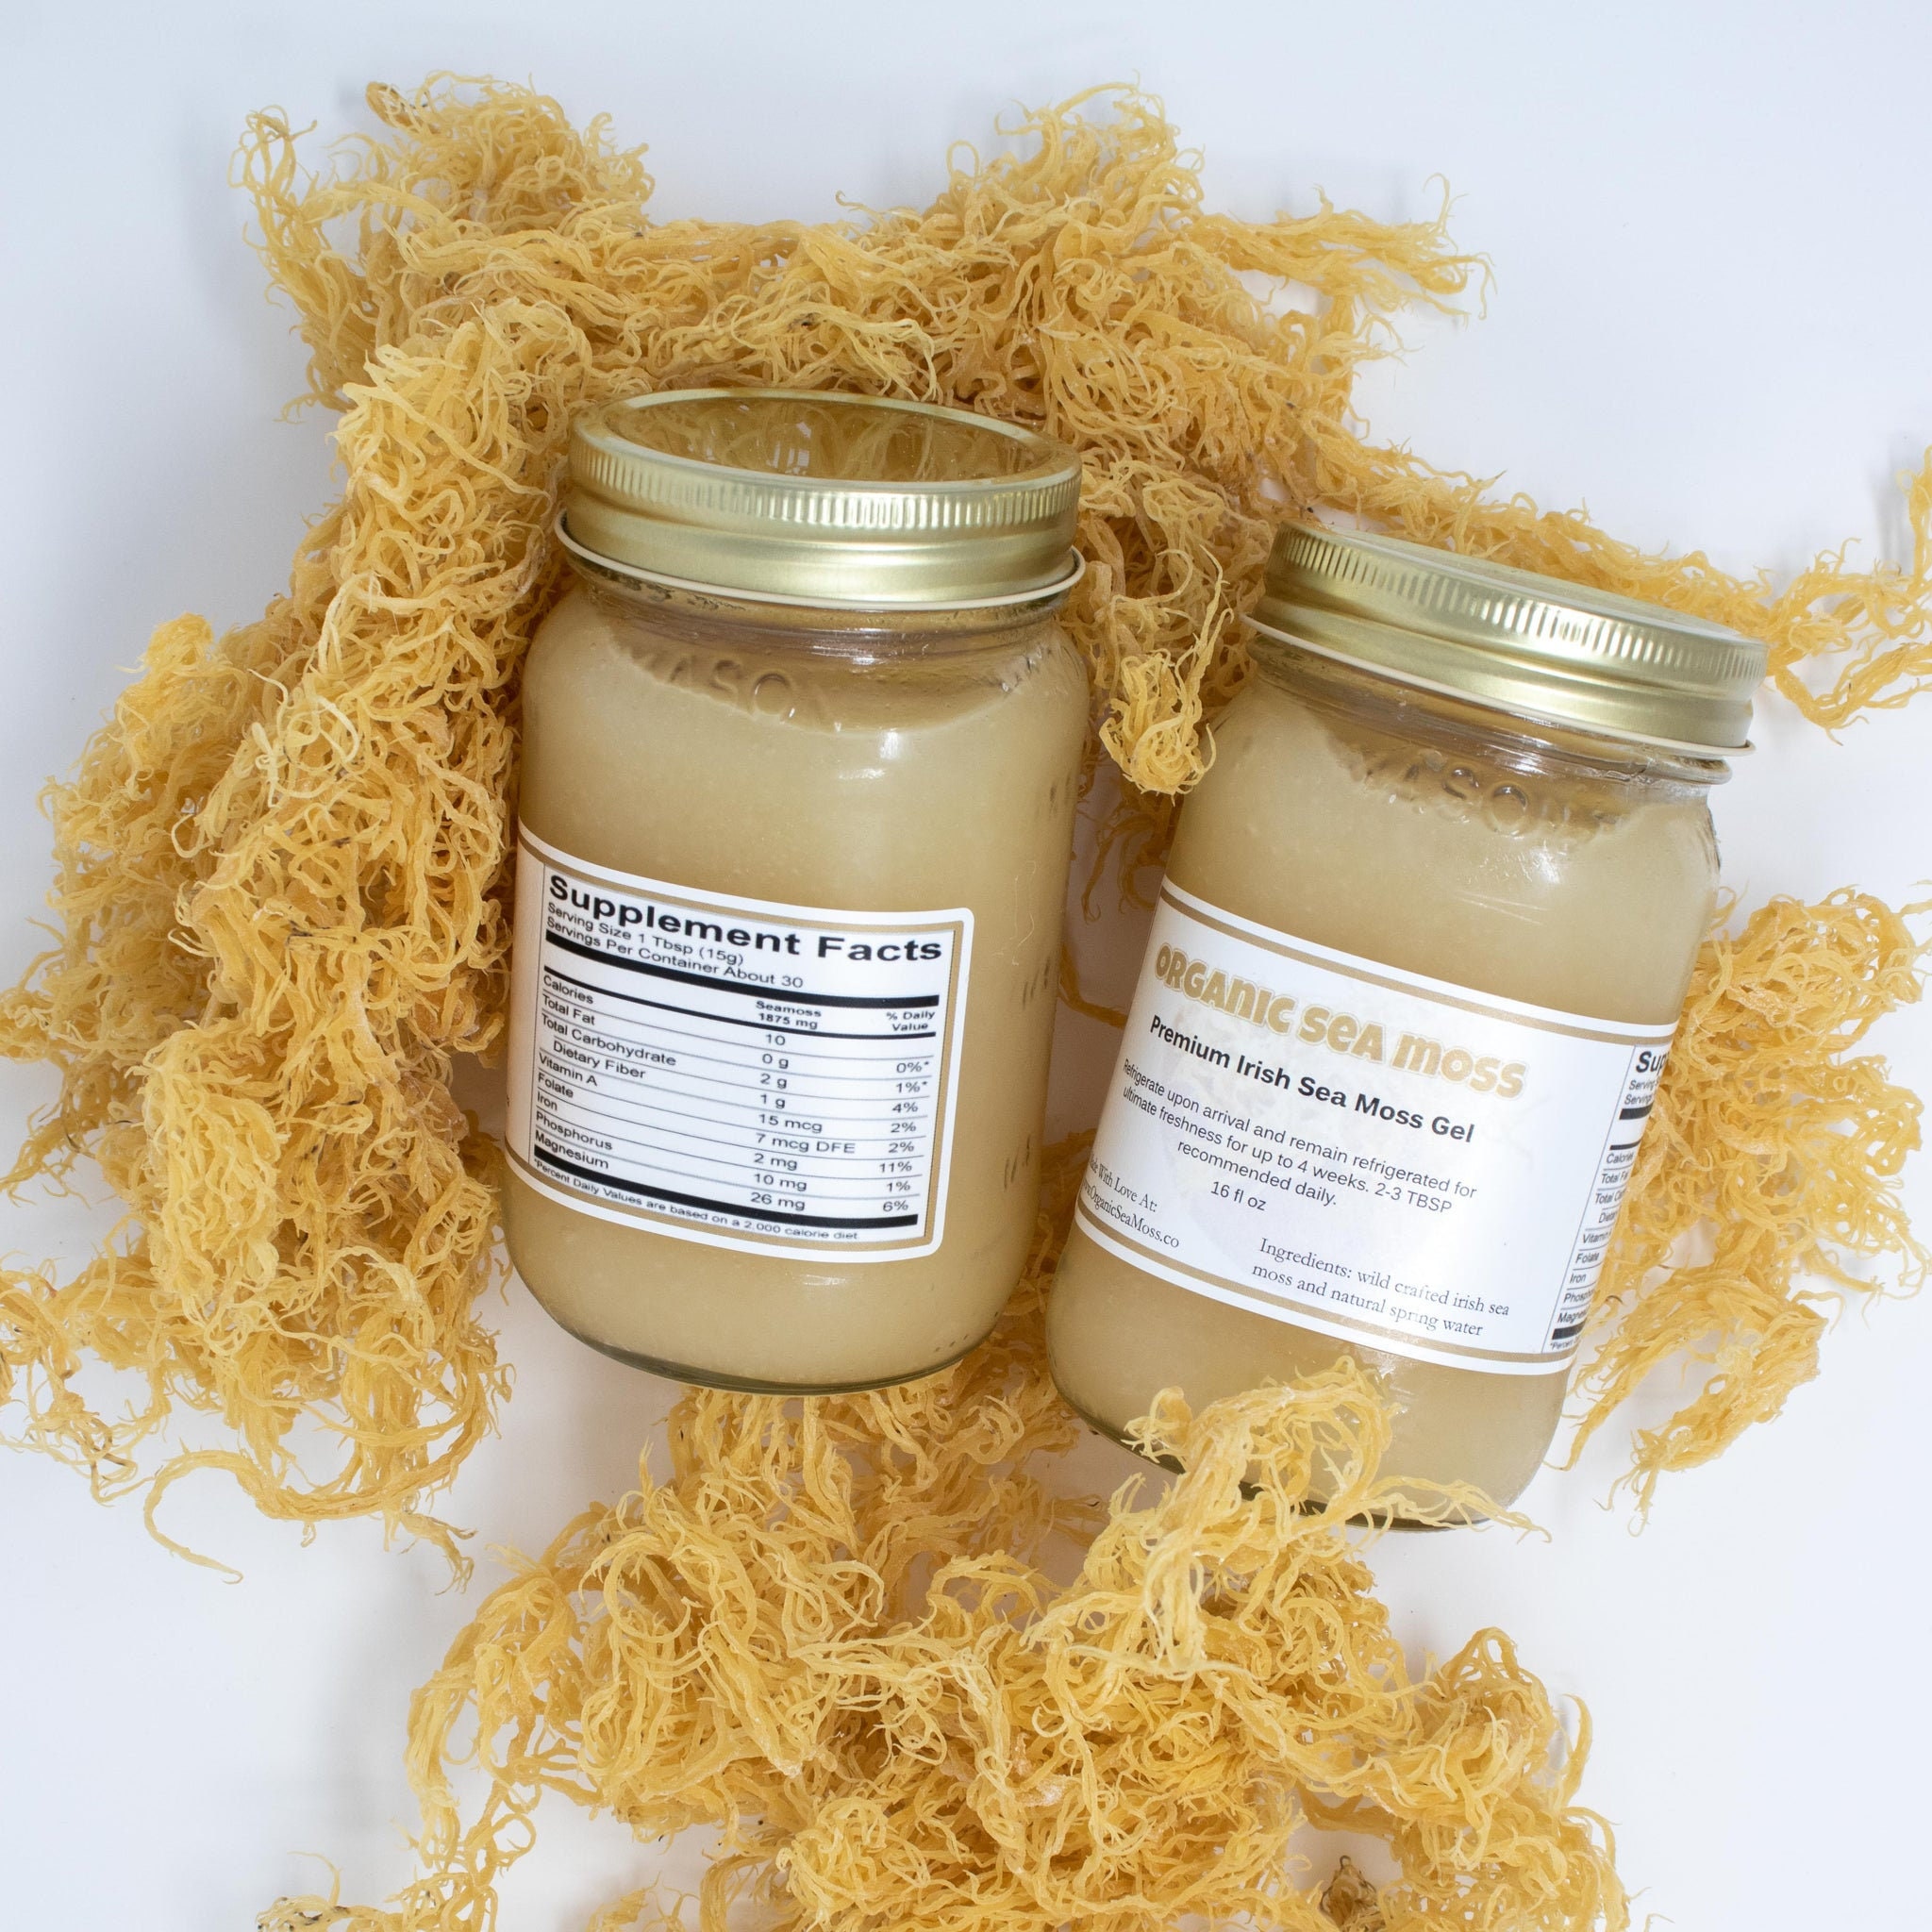 Buy Organic Sea Moss Gel Wildcrafted. Made to Order. Vegan. 92 Minerals  Online in India 